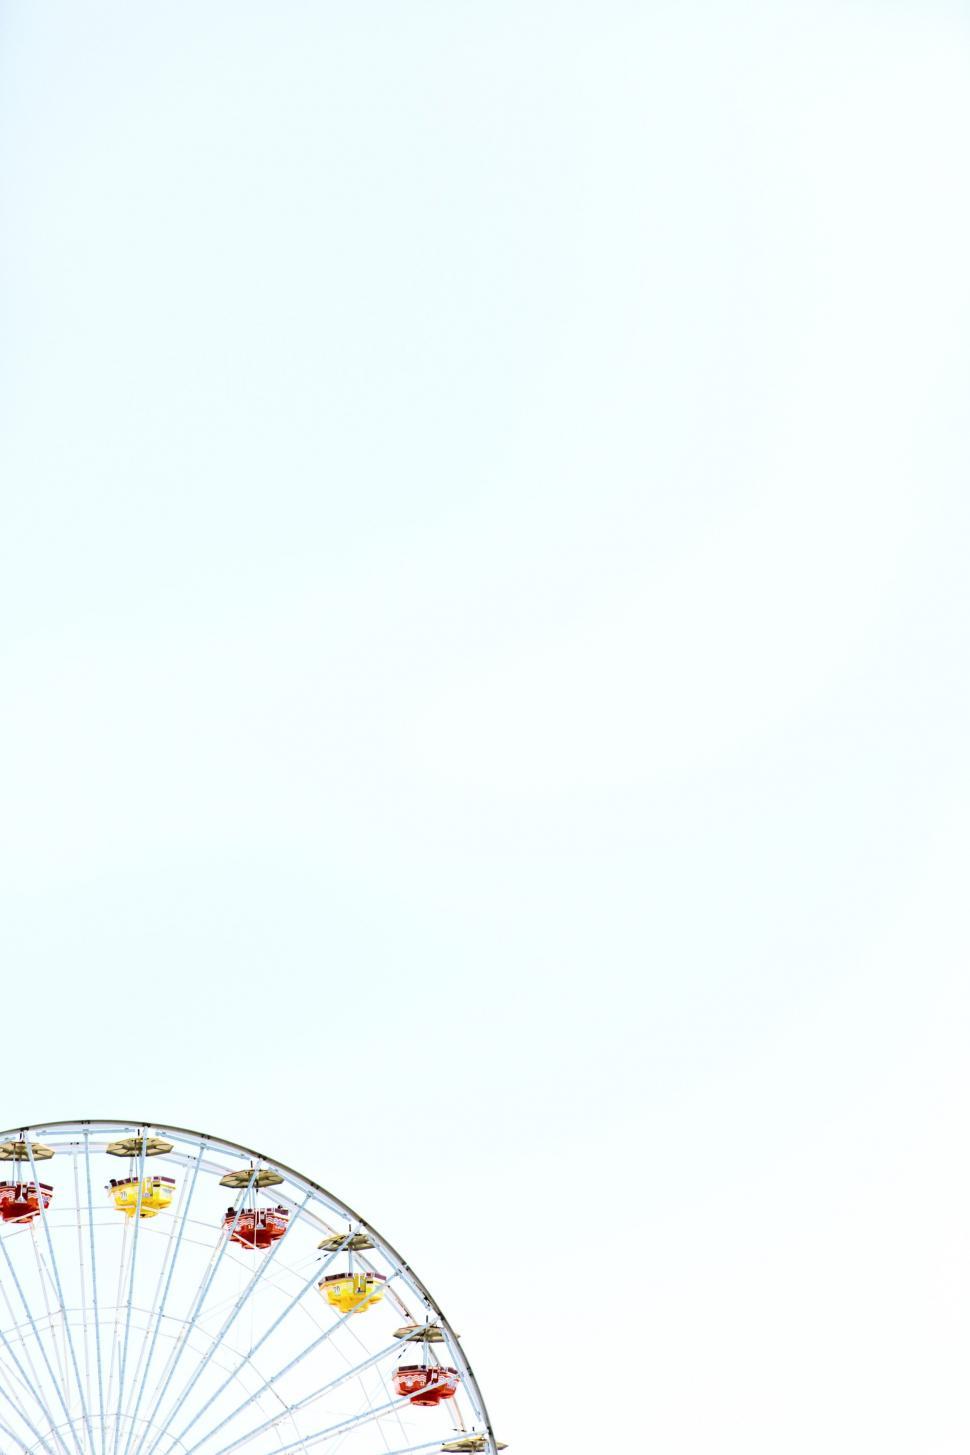 Free Image of Partial view of Ferris wheel against sky 